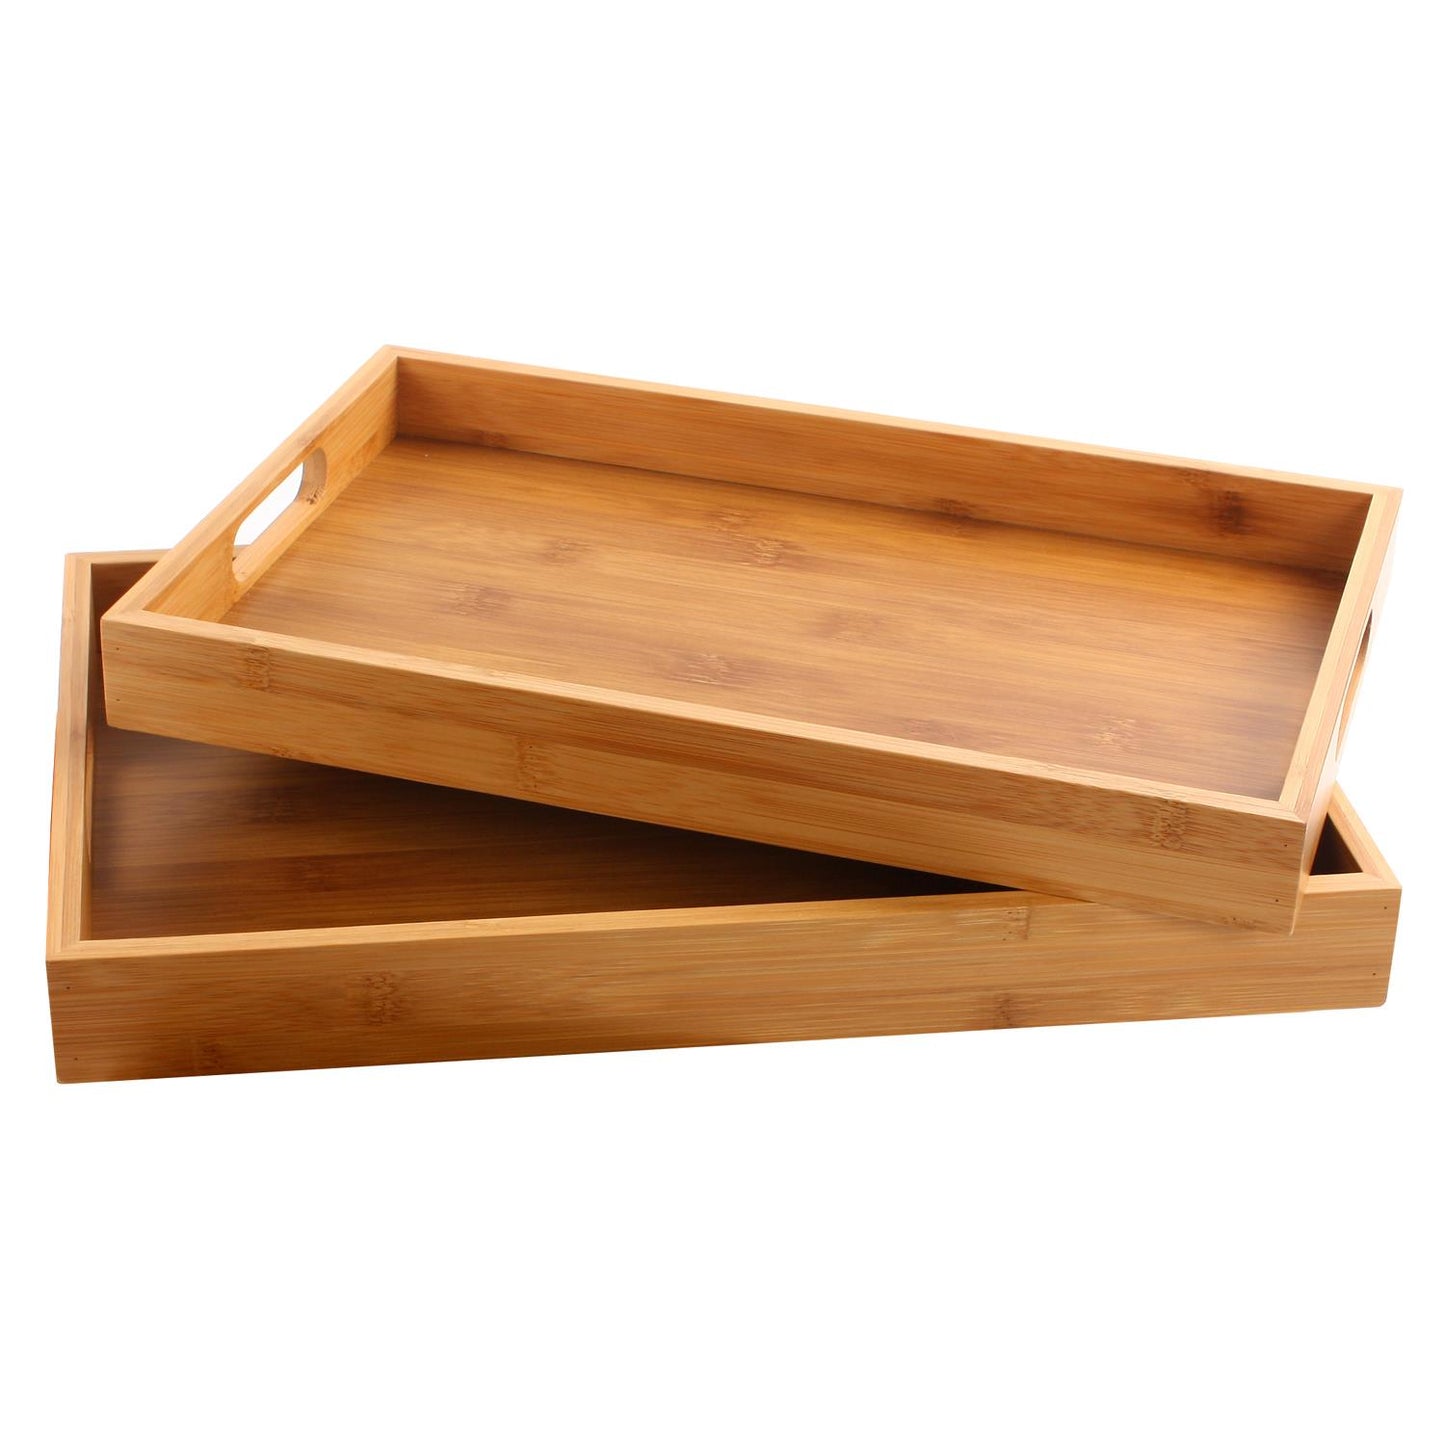 BAMBOO SERVING TRAY 15 X 10